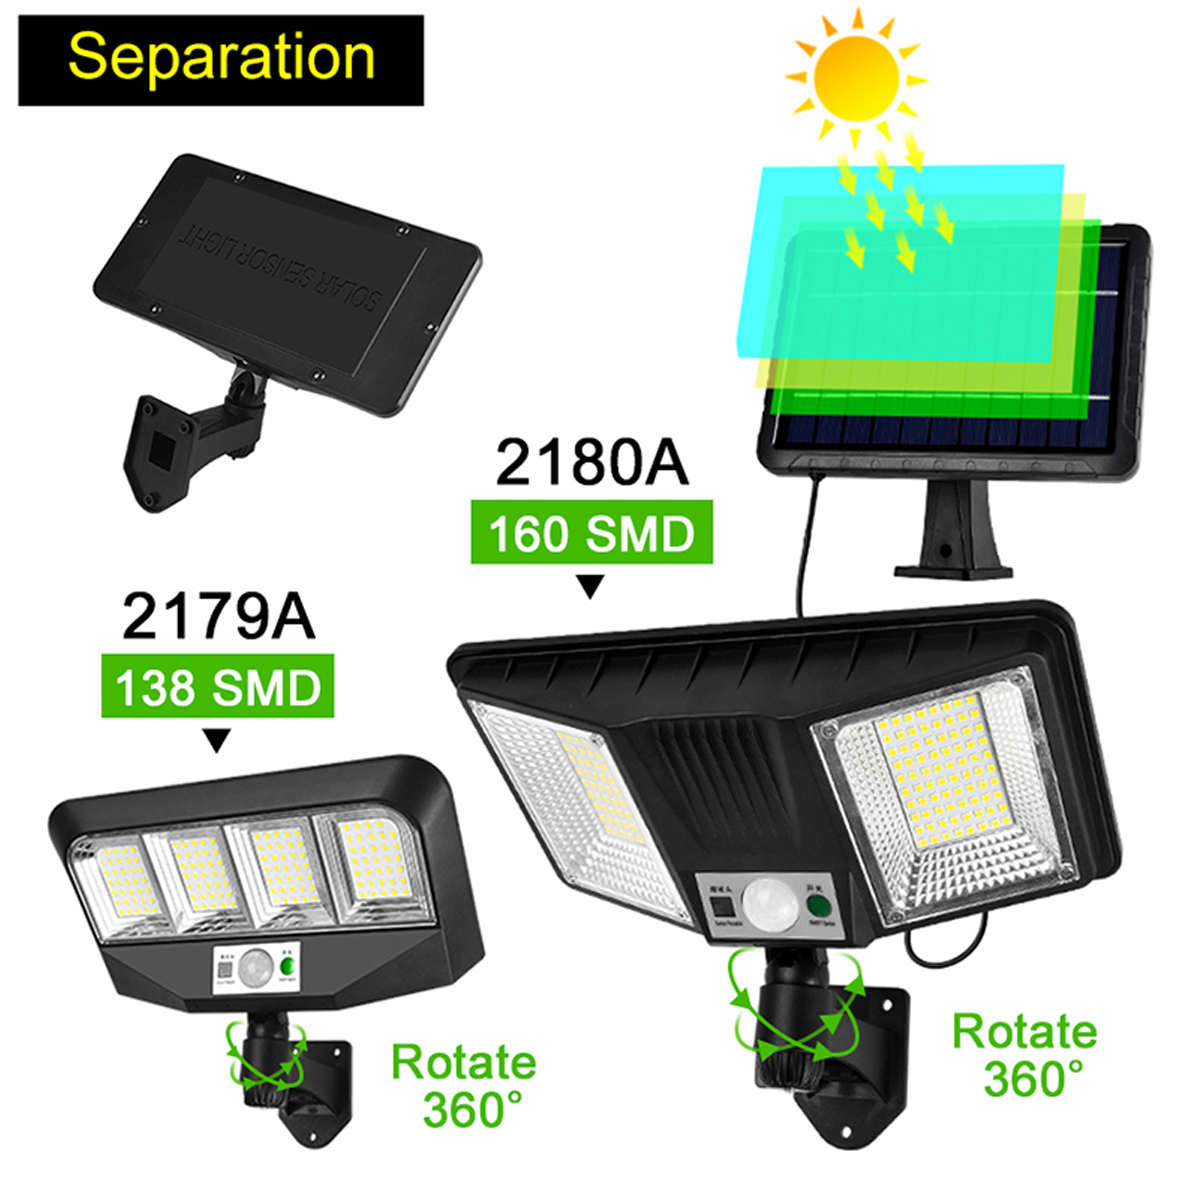 Solar-Lights-Split-Induction-Lights-with-Remote-Control-LED-Wall-Lights-Super-Bright-Outdoor-Camping-1897763-4